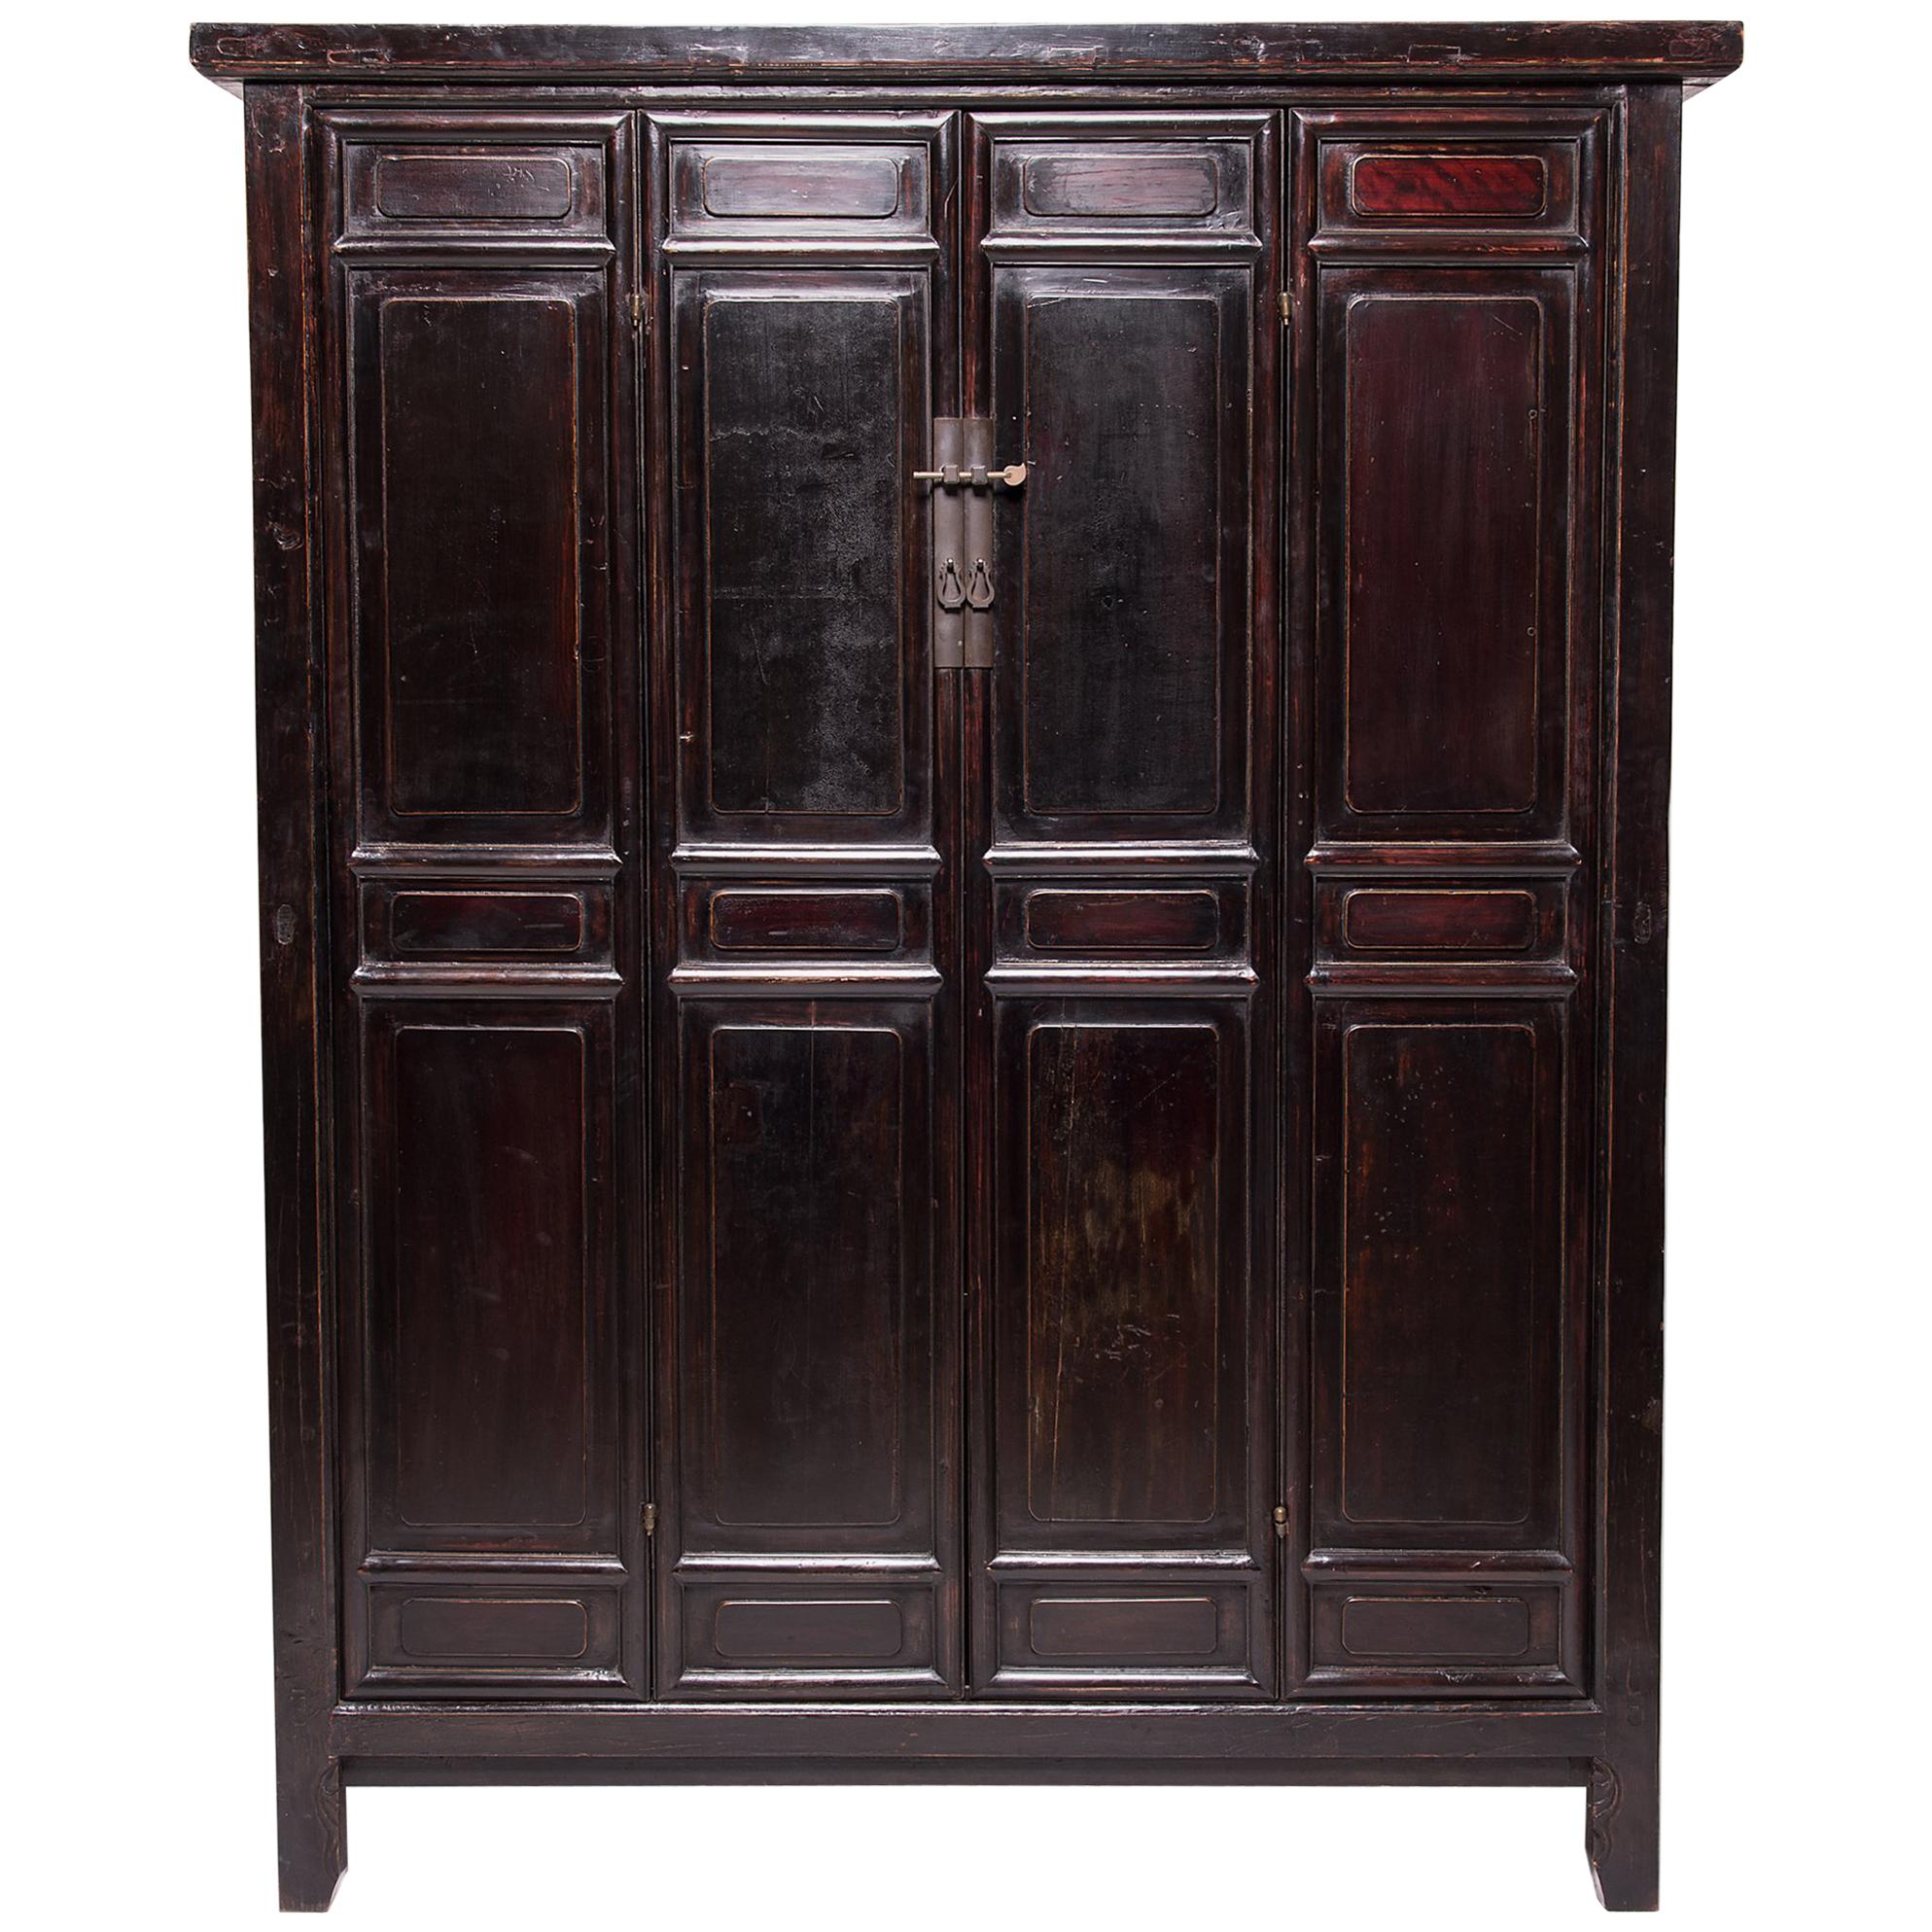 Chinese Four Panel Cabinet, c. 1850